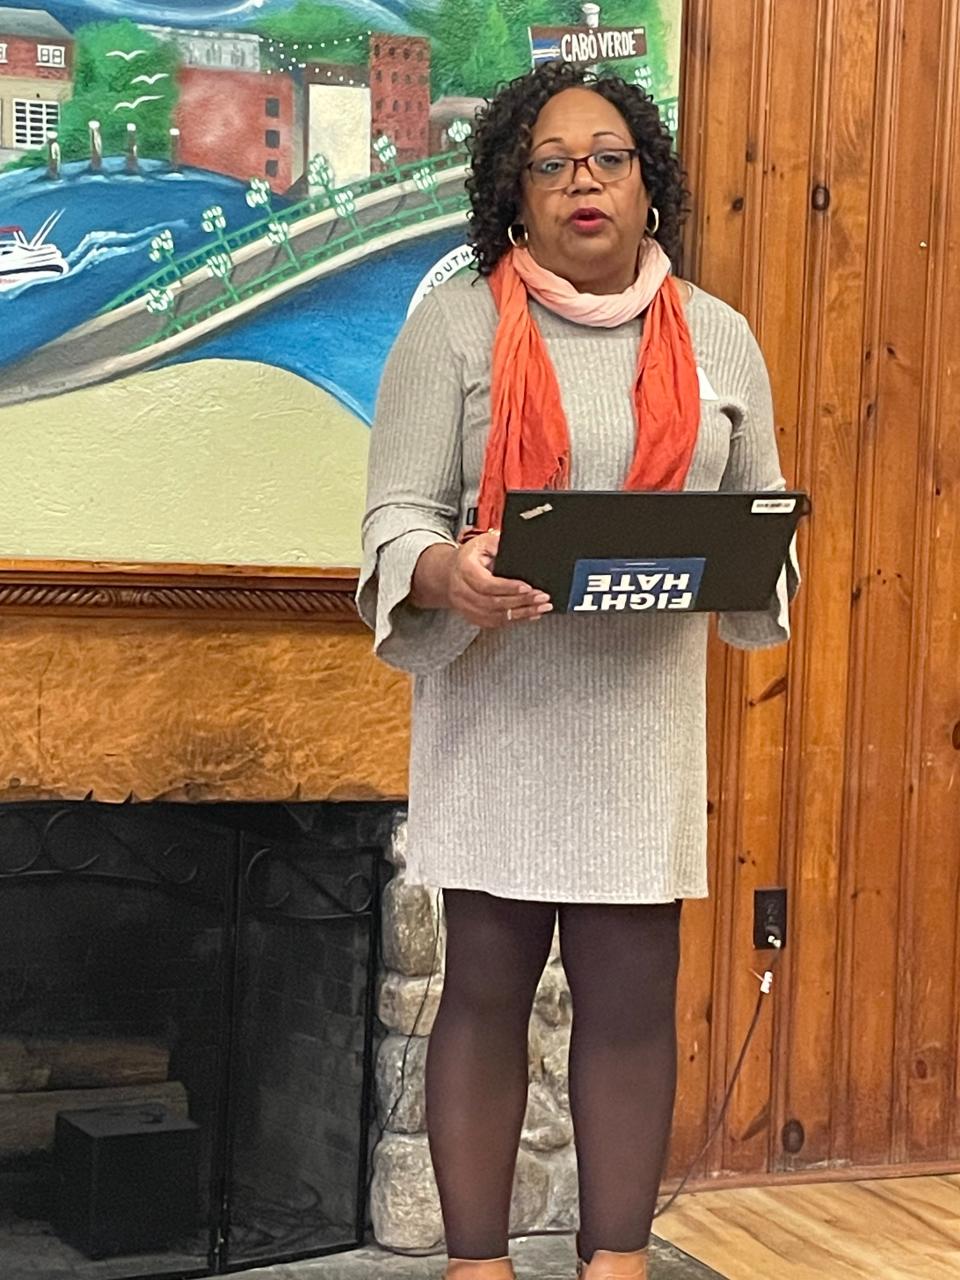 Social Equity Council Director Ginne-Rae Clay spoke to organizations in Norwich, New London and Willimantic on Tuesday about how the Social Equity Council is developing a plan to distribute funds from the cannabis industry.